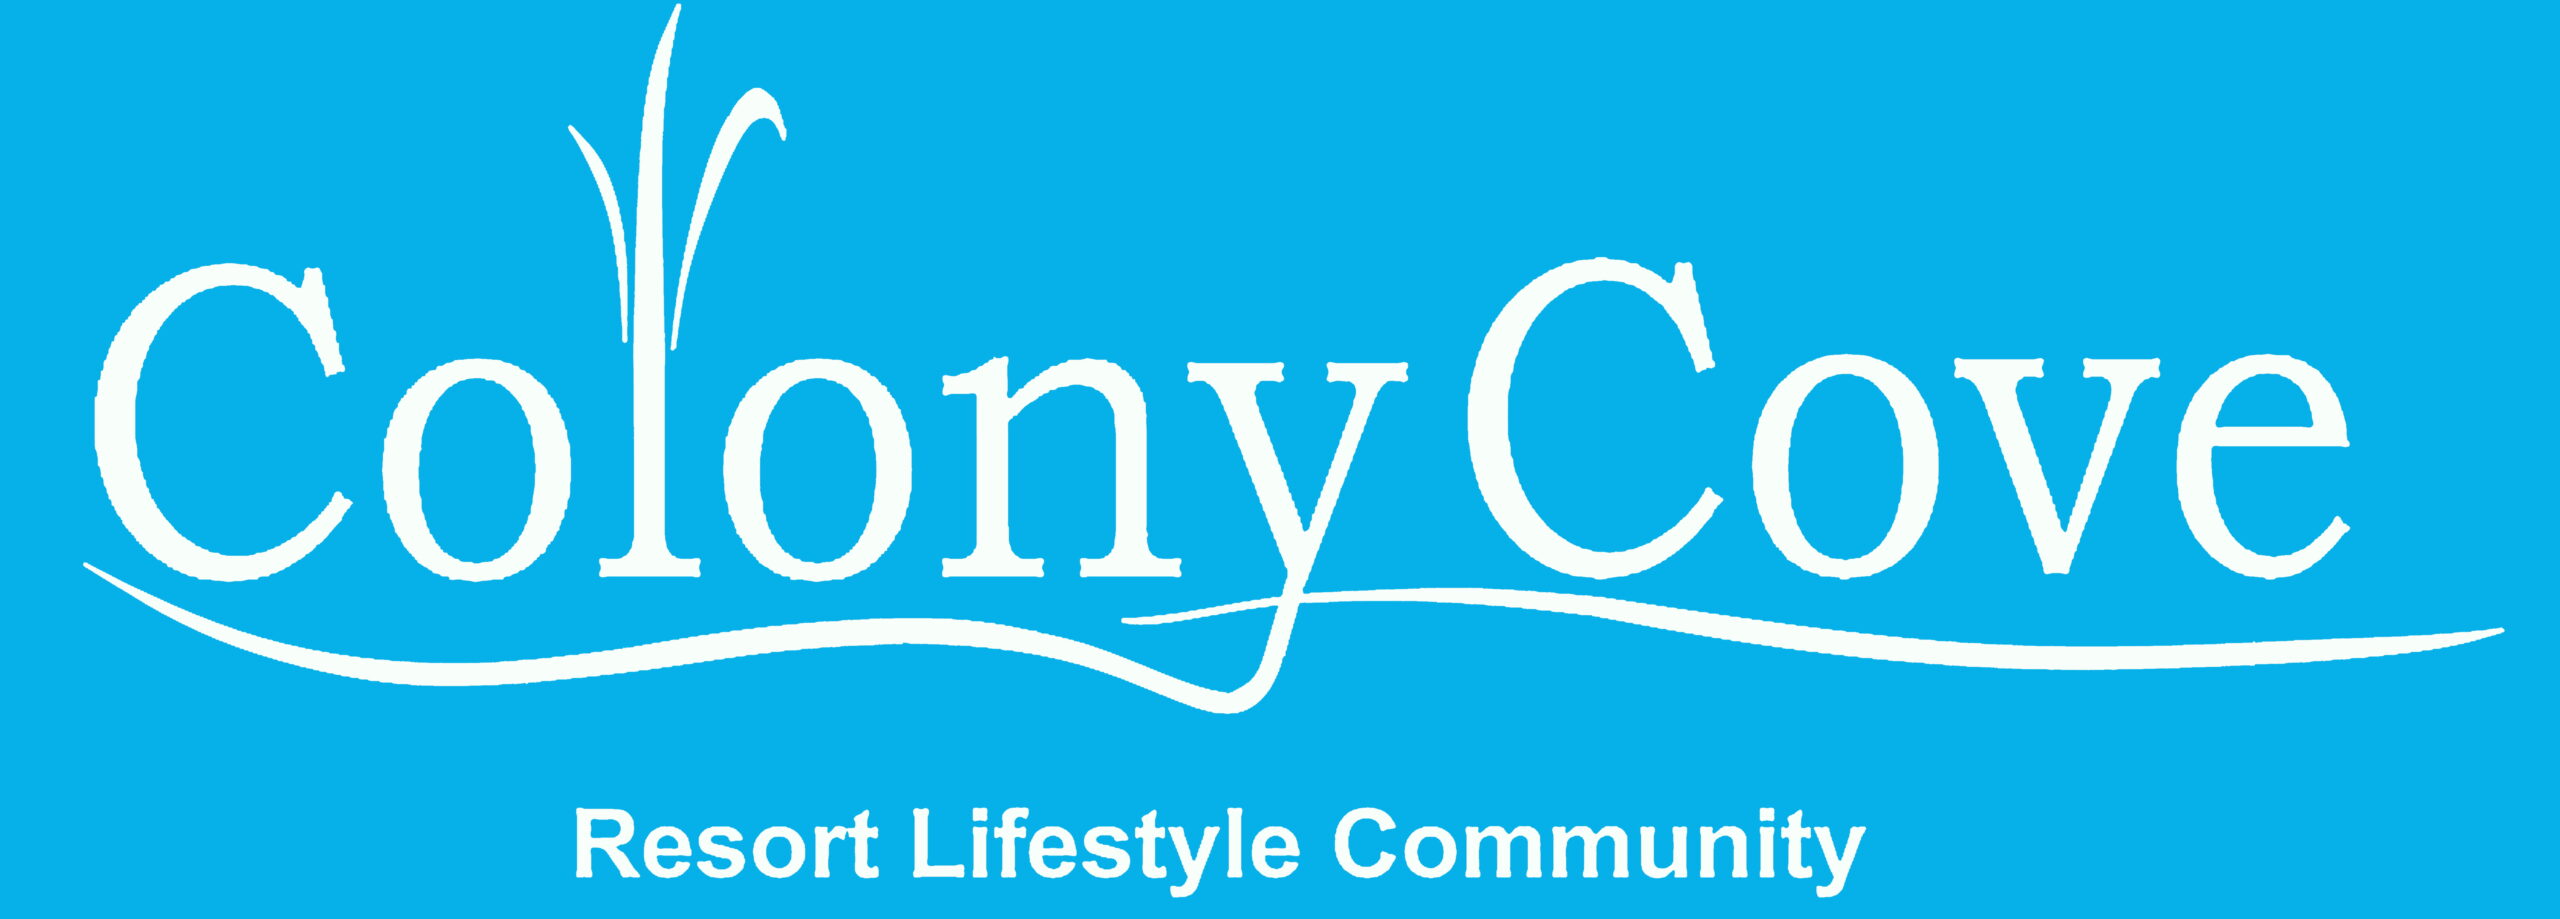 Logo of Colony Cove Mobile/Manufactured Home Resort Lifestyle Park/Community in Ellenton, Florida